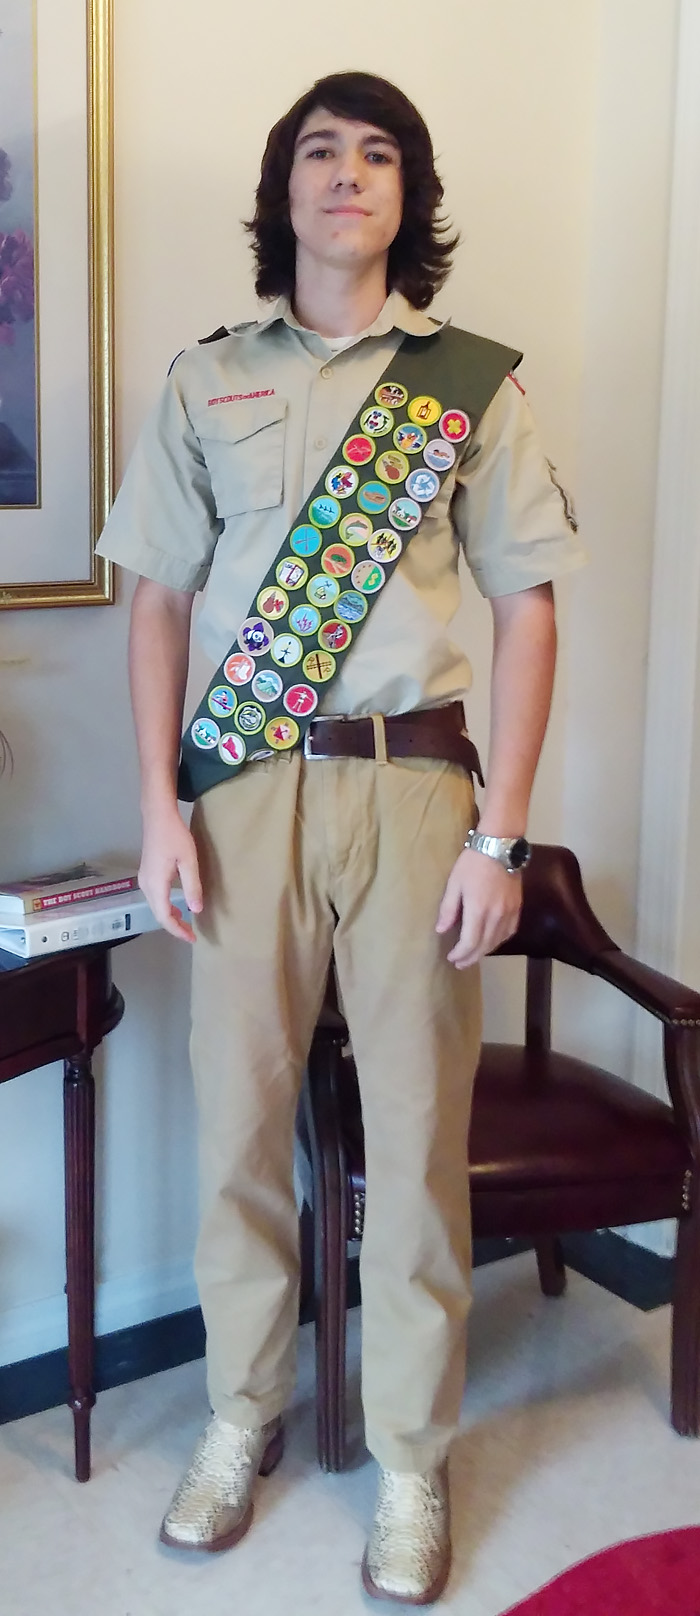 Blake Earns Eagle Scout in Lucedale, MS